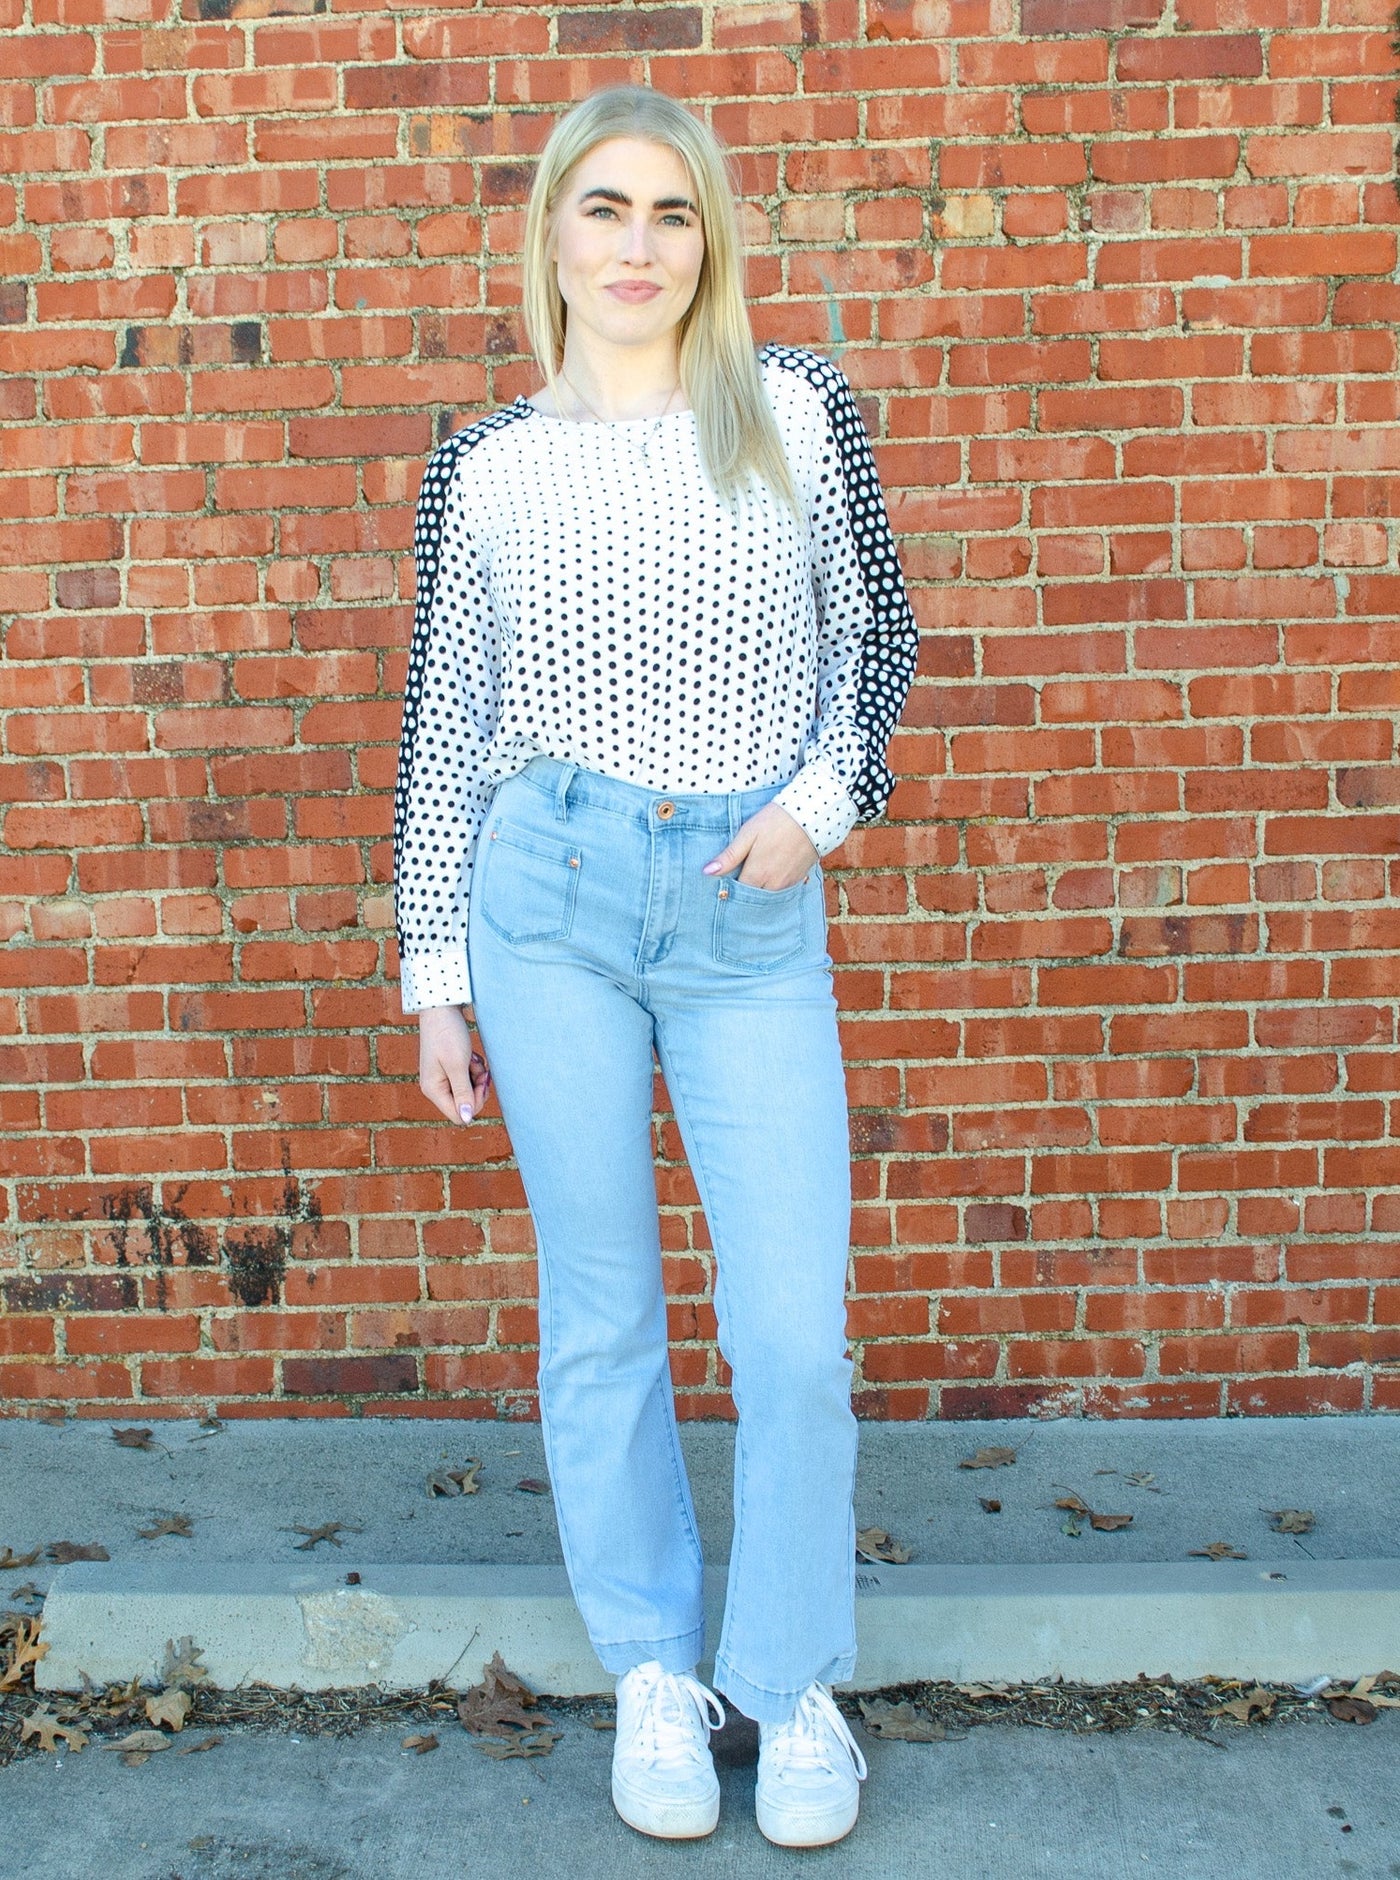 Model is wearing high rise light wash denim jeans with stitched pocket squares on the hips. jeans are worn with a polka dot blouse. 